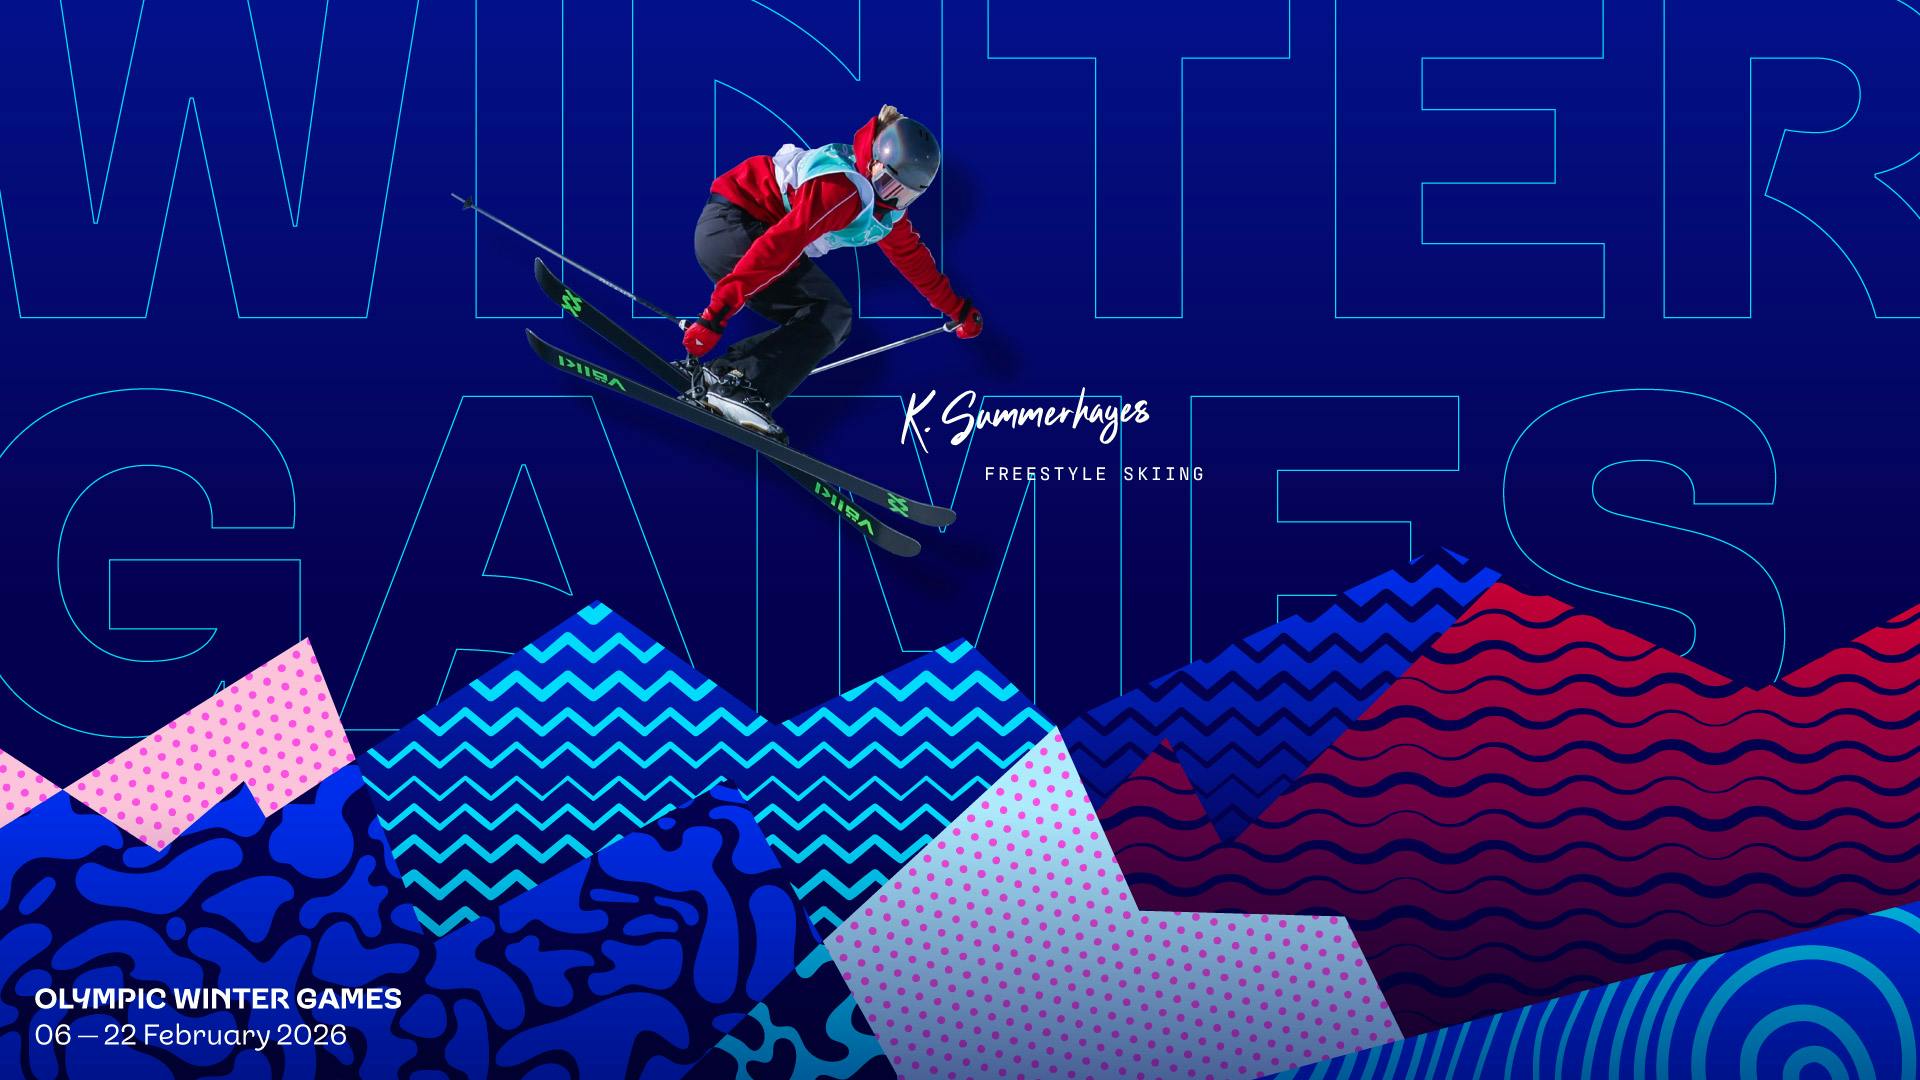 Graphic featuring the Team GB rebrand, showing a photograph of an Olympic skiier on top of a graphic patterns forming the shape of mountains, and the words 'Winter Games' in the background